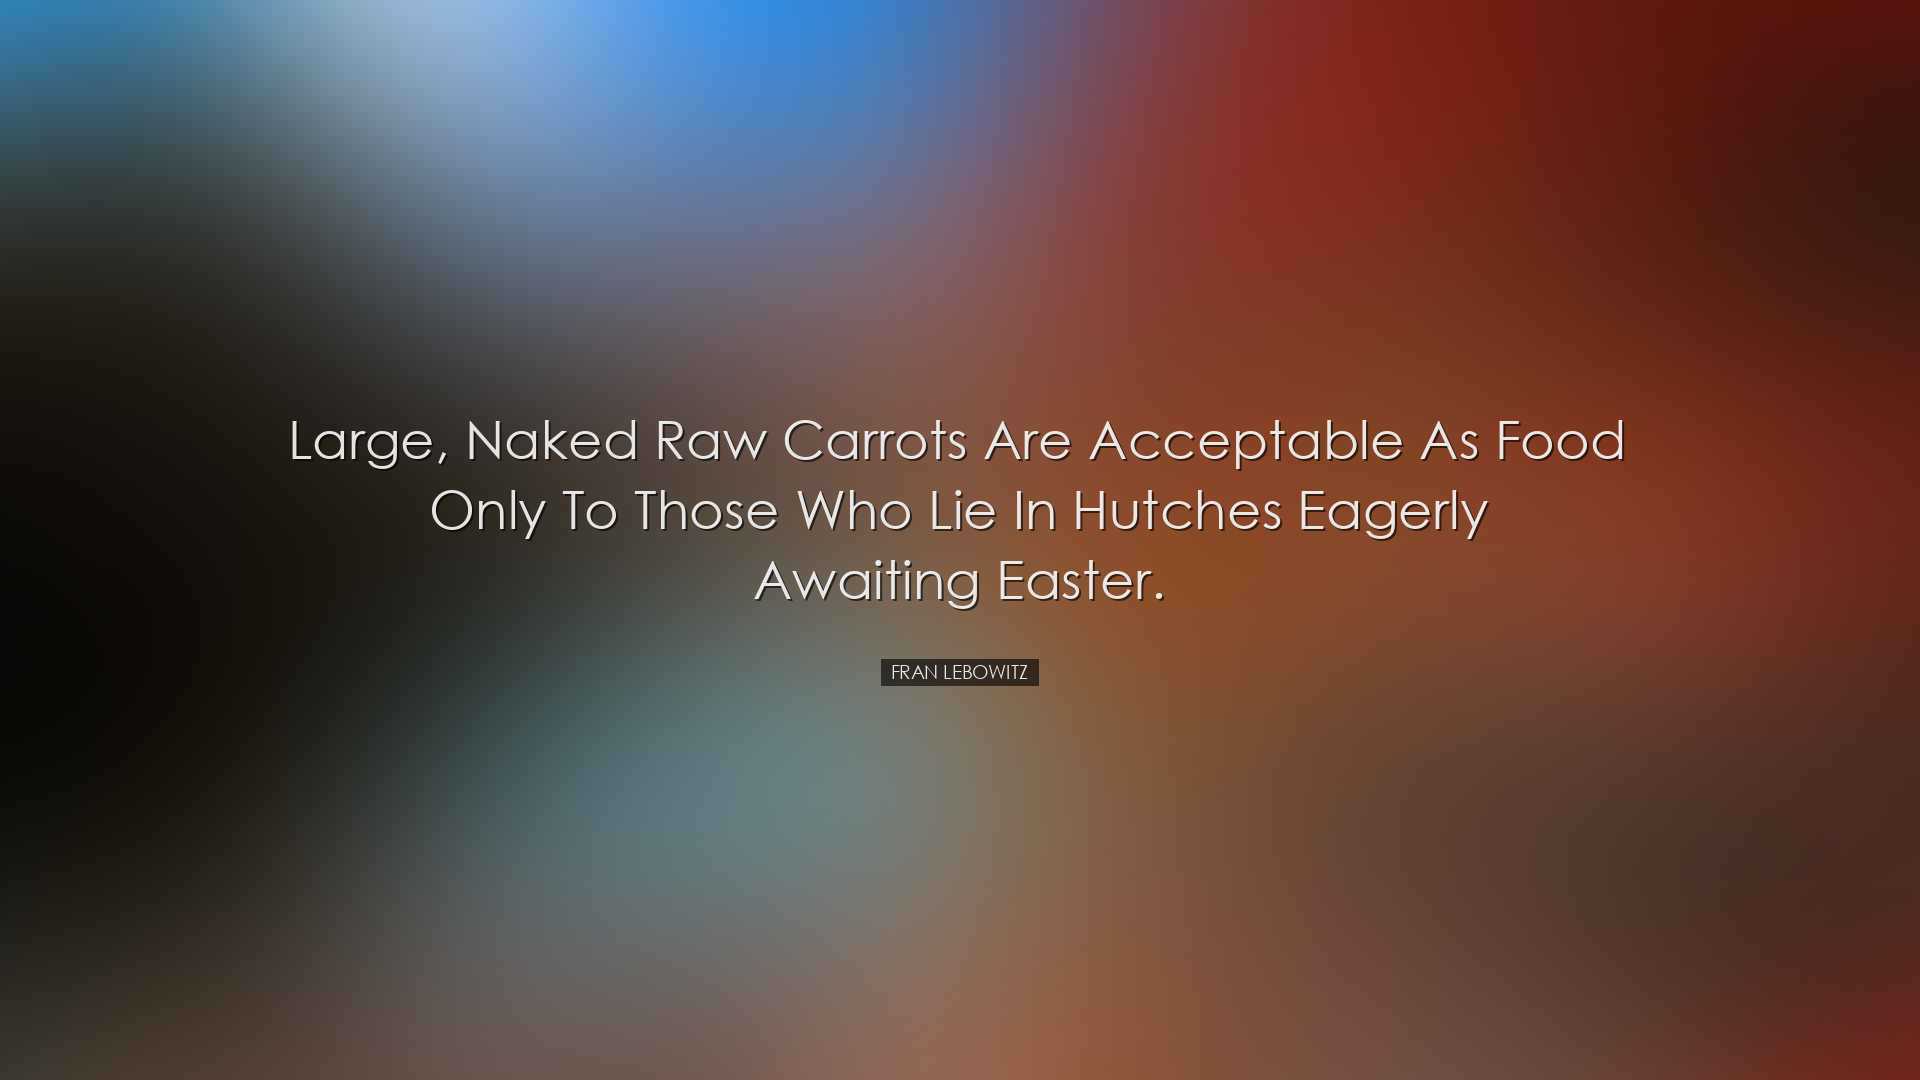 Large, naked raw carrots are acceptable as food only to those who